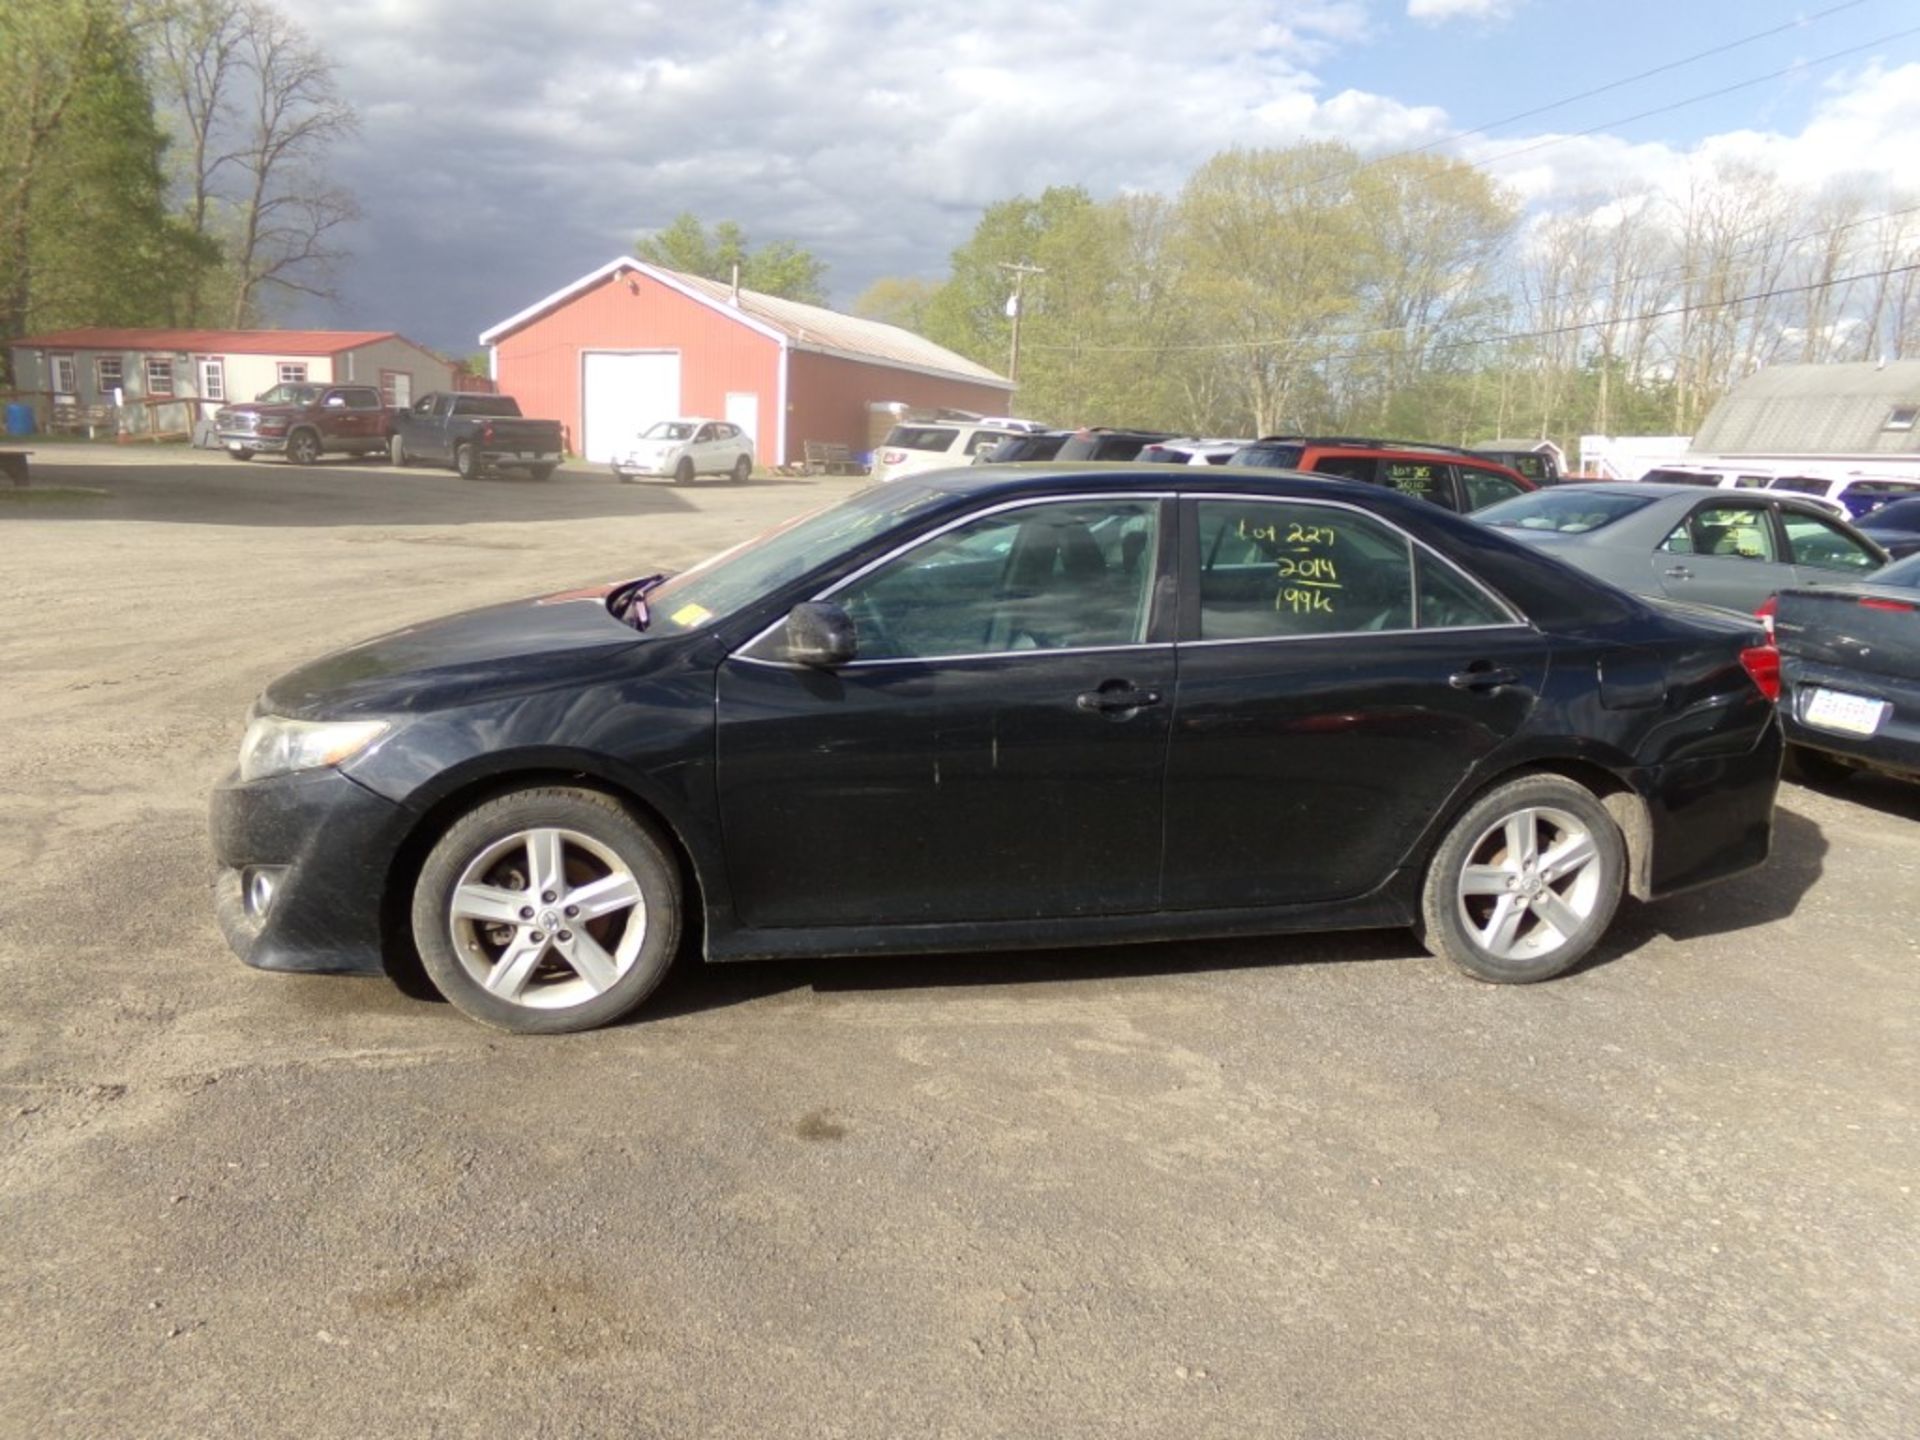 2014 Toyota Camry, Black, Auto Trans., Leather, 199K Miles, CONDITION UNKNOWN-NOT RUNNING-NEEDS - Image 3 of 10